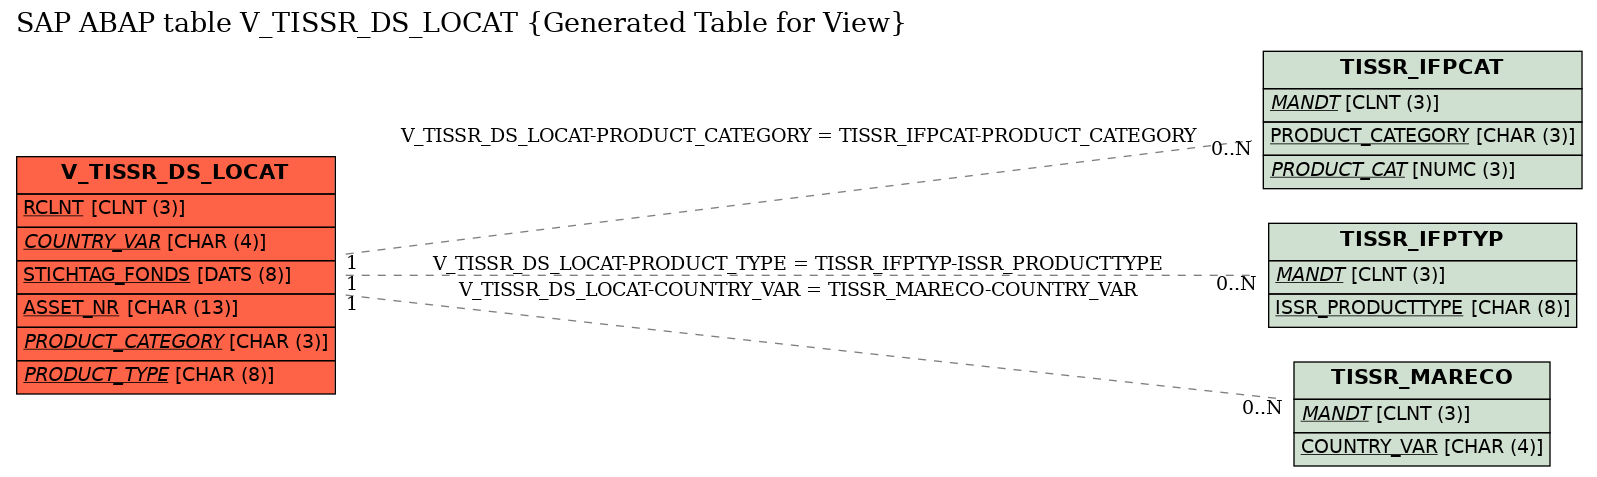 E-R Diagram for table V_TISSR_DS_LOCAT (Generated Table for View)